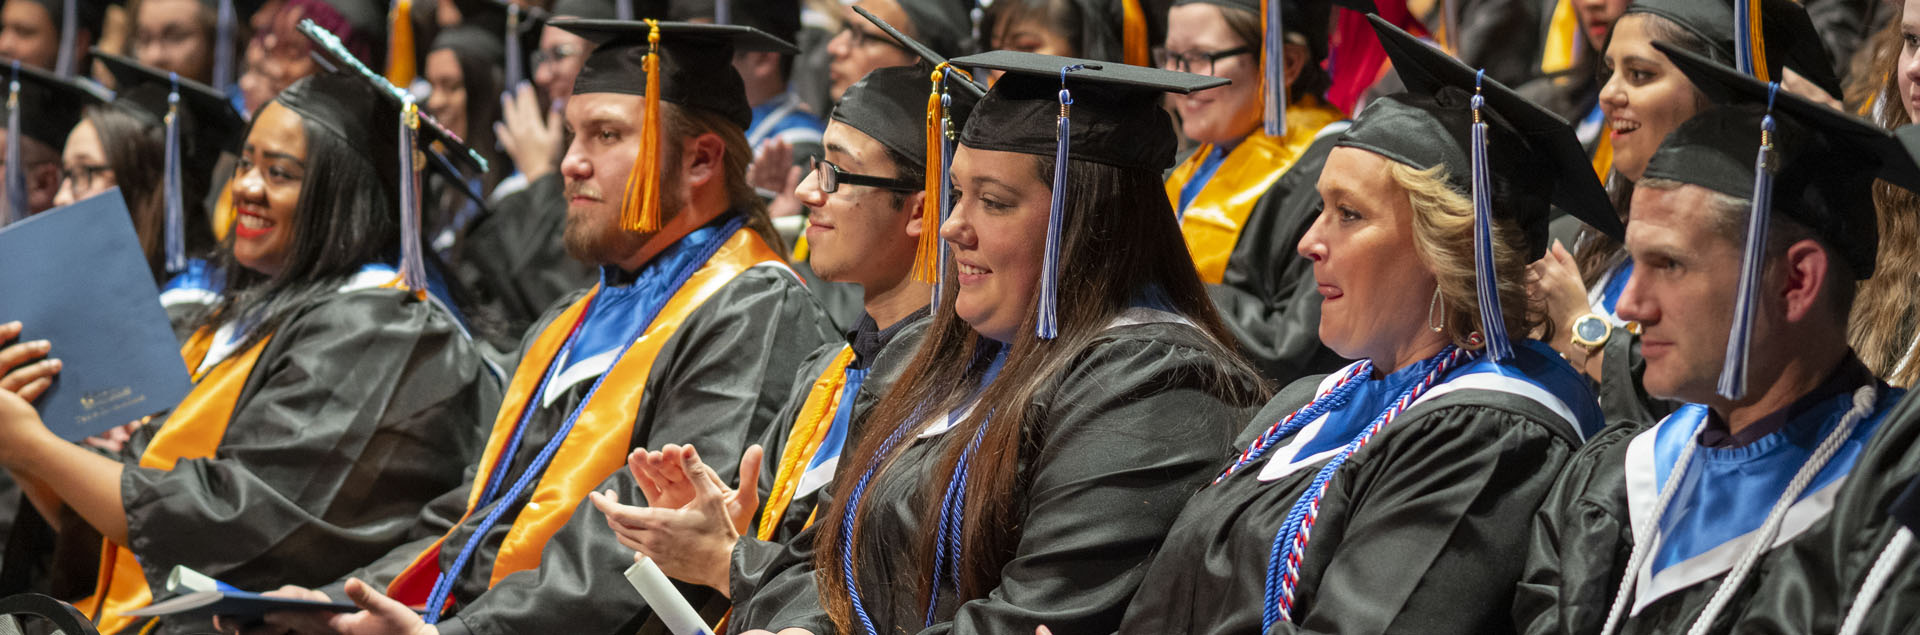 Nearly 300 graduating students will participate in Macomb Community College's 109th commencement ceremony. The college will award more than 1,200 associate degrees during 2023.